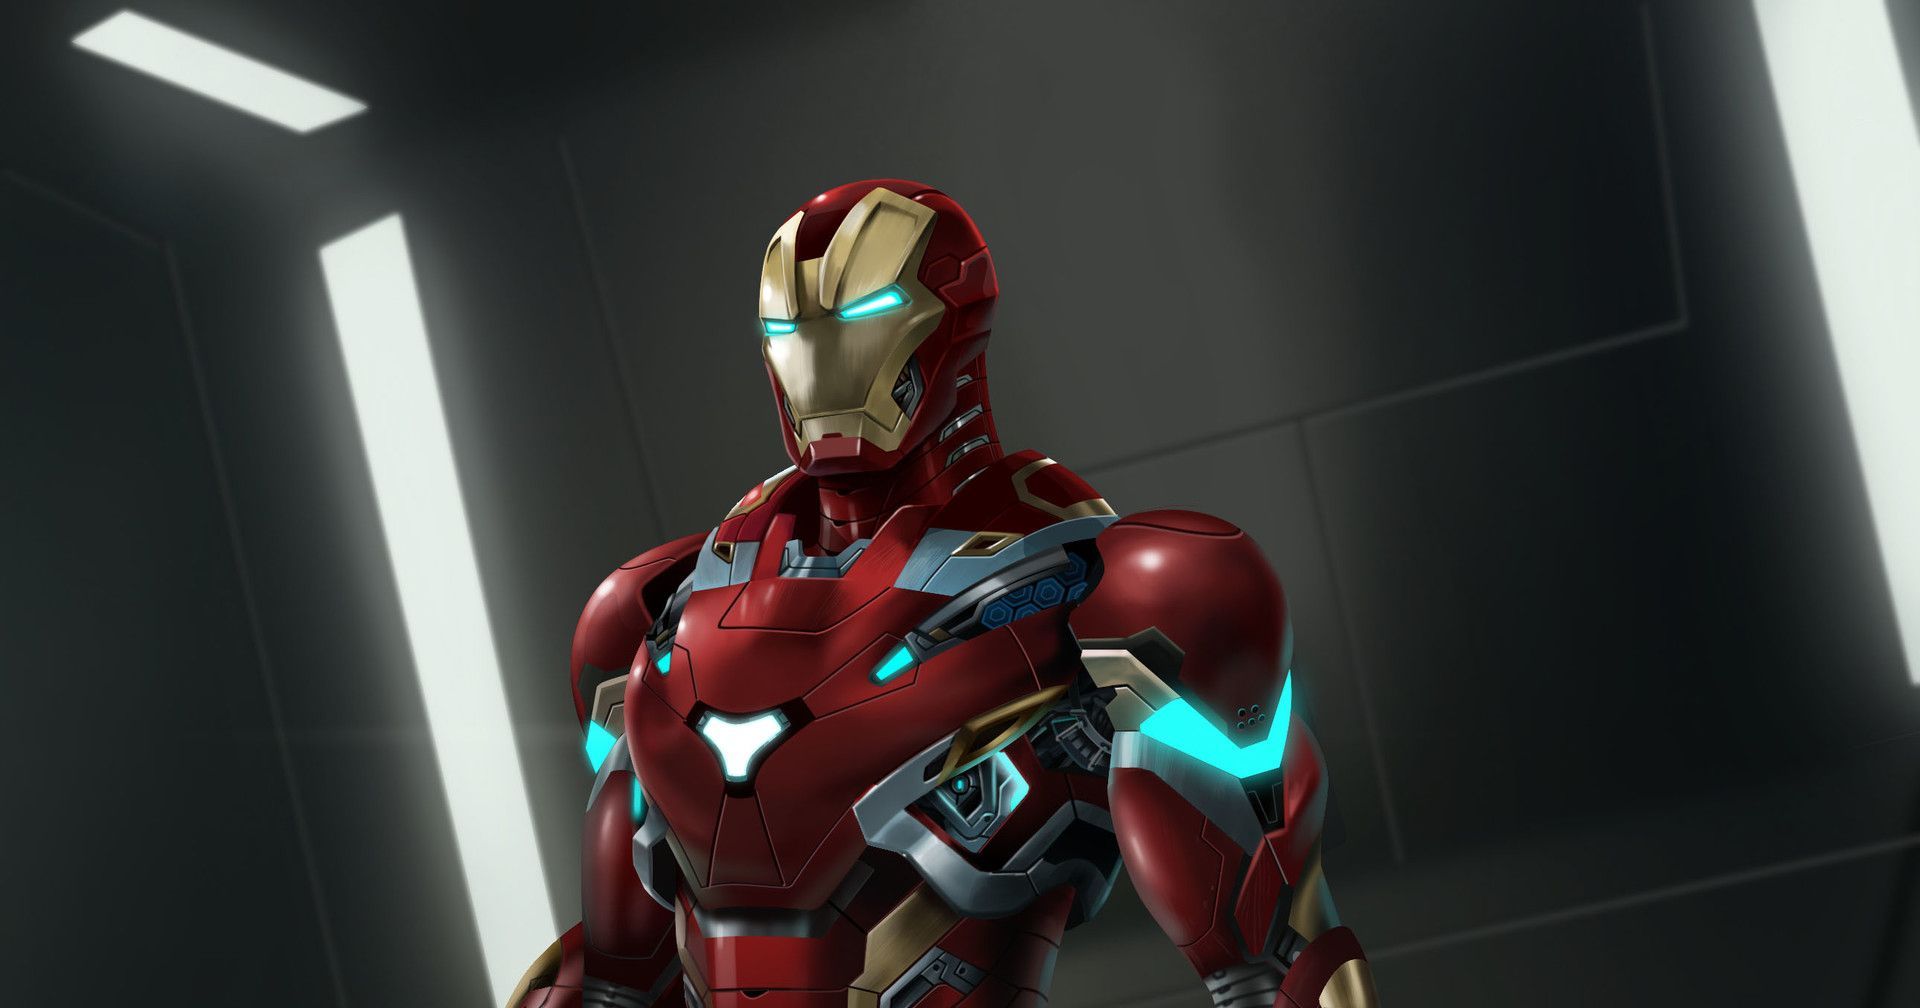 Iron Man Suits Wallpaper Free Iron Man Suits Background